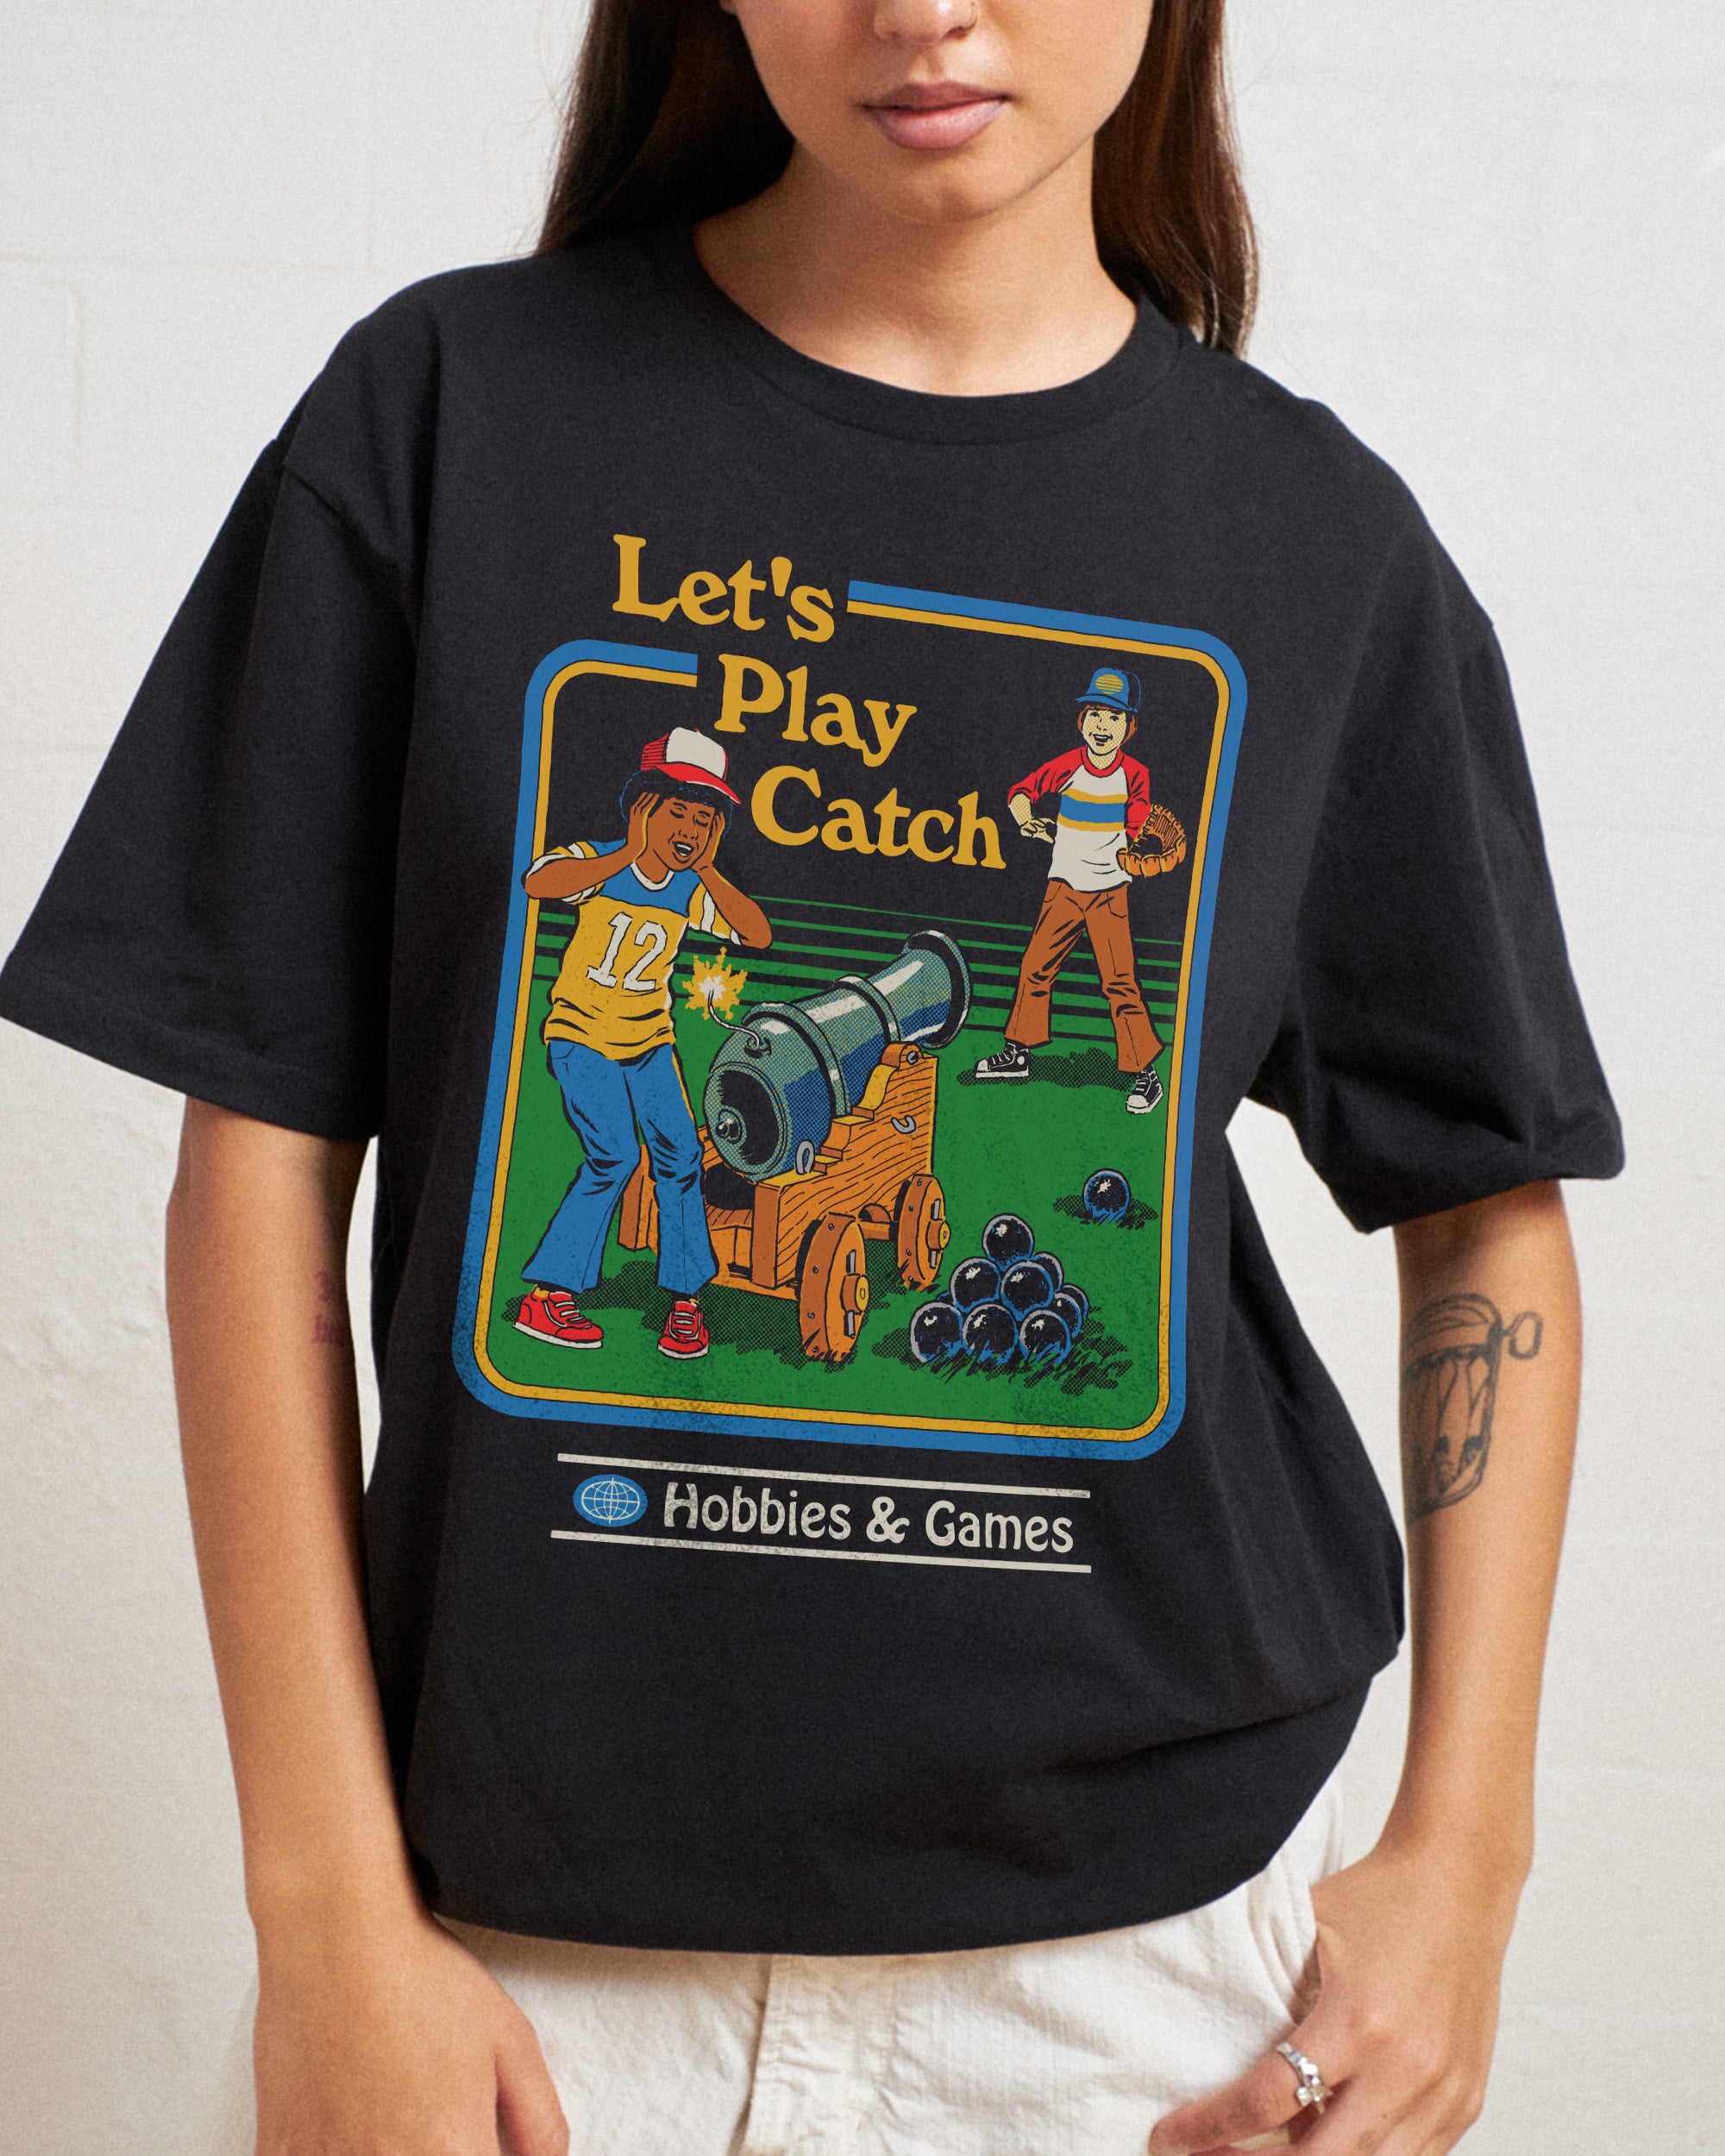 Let's Play Catch T-Shirt